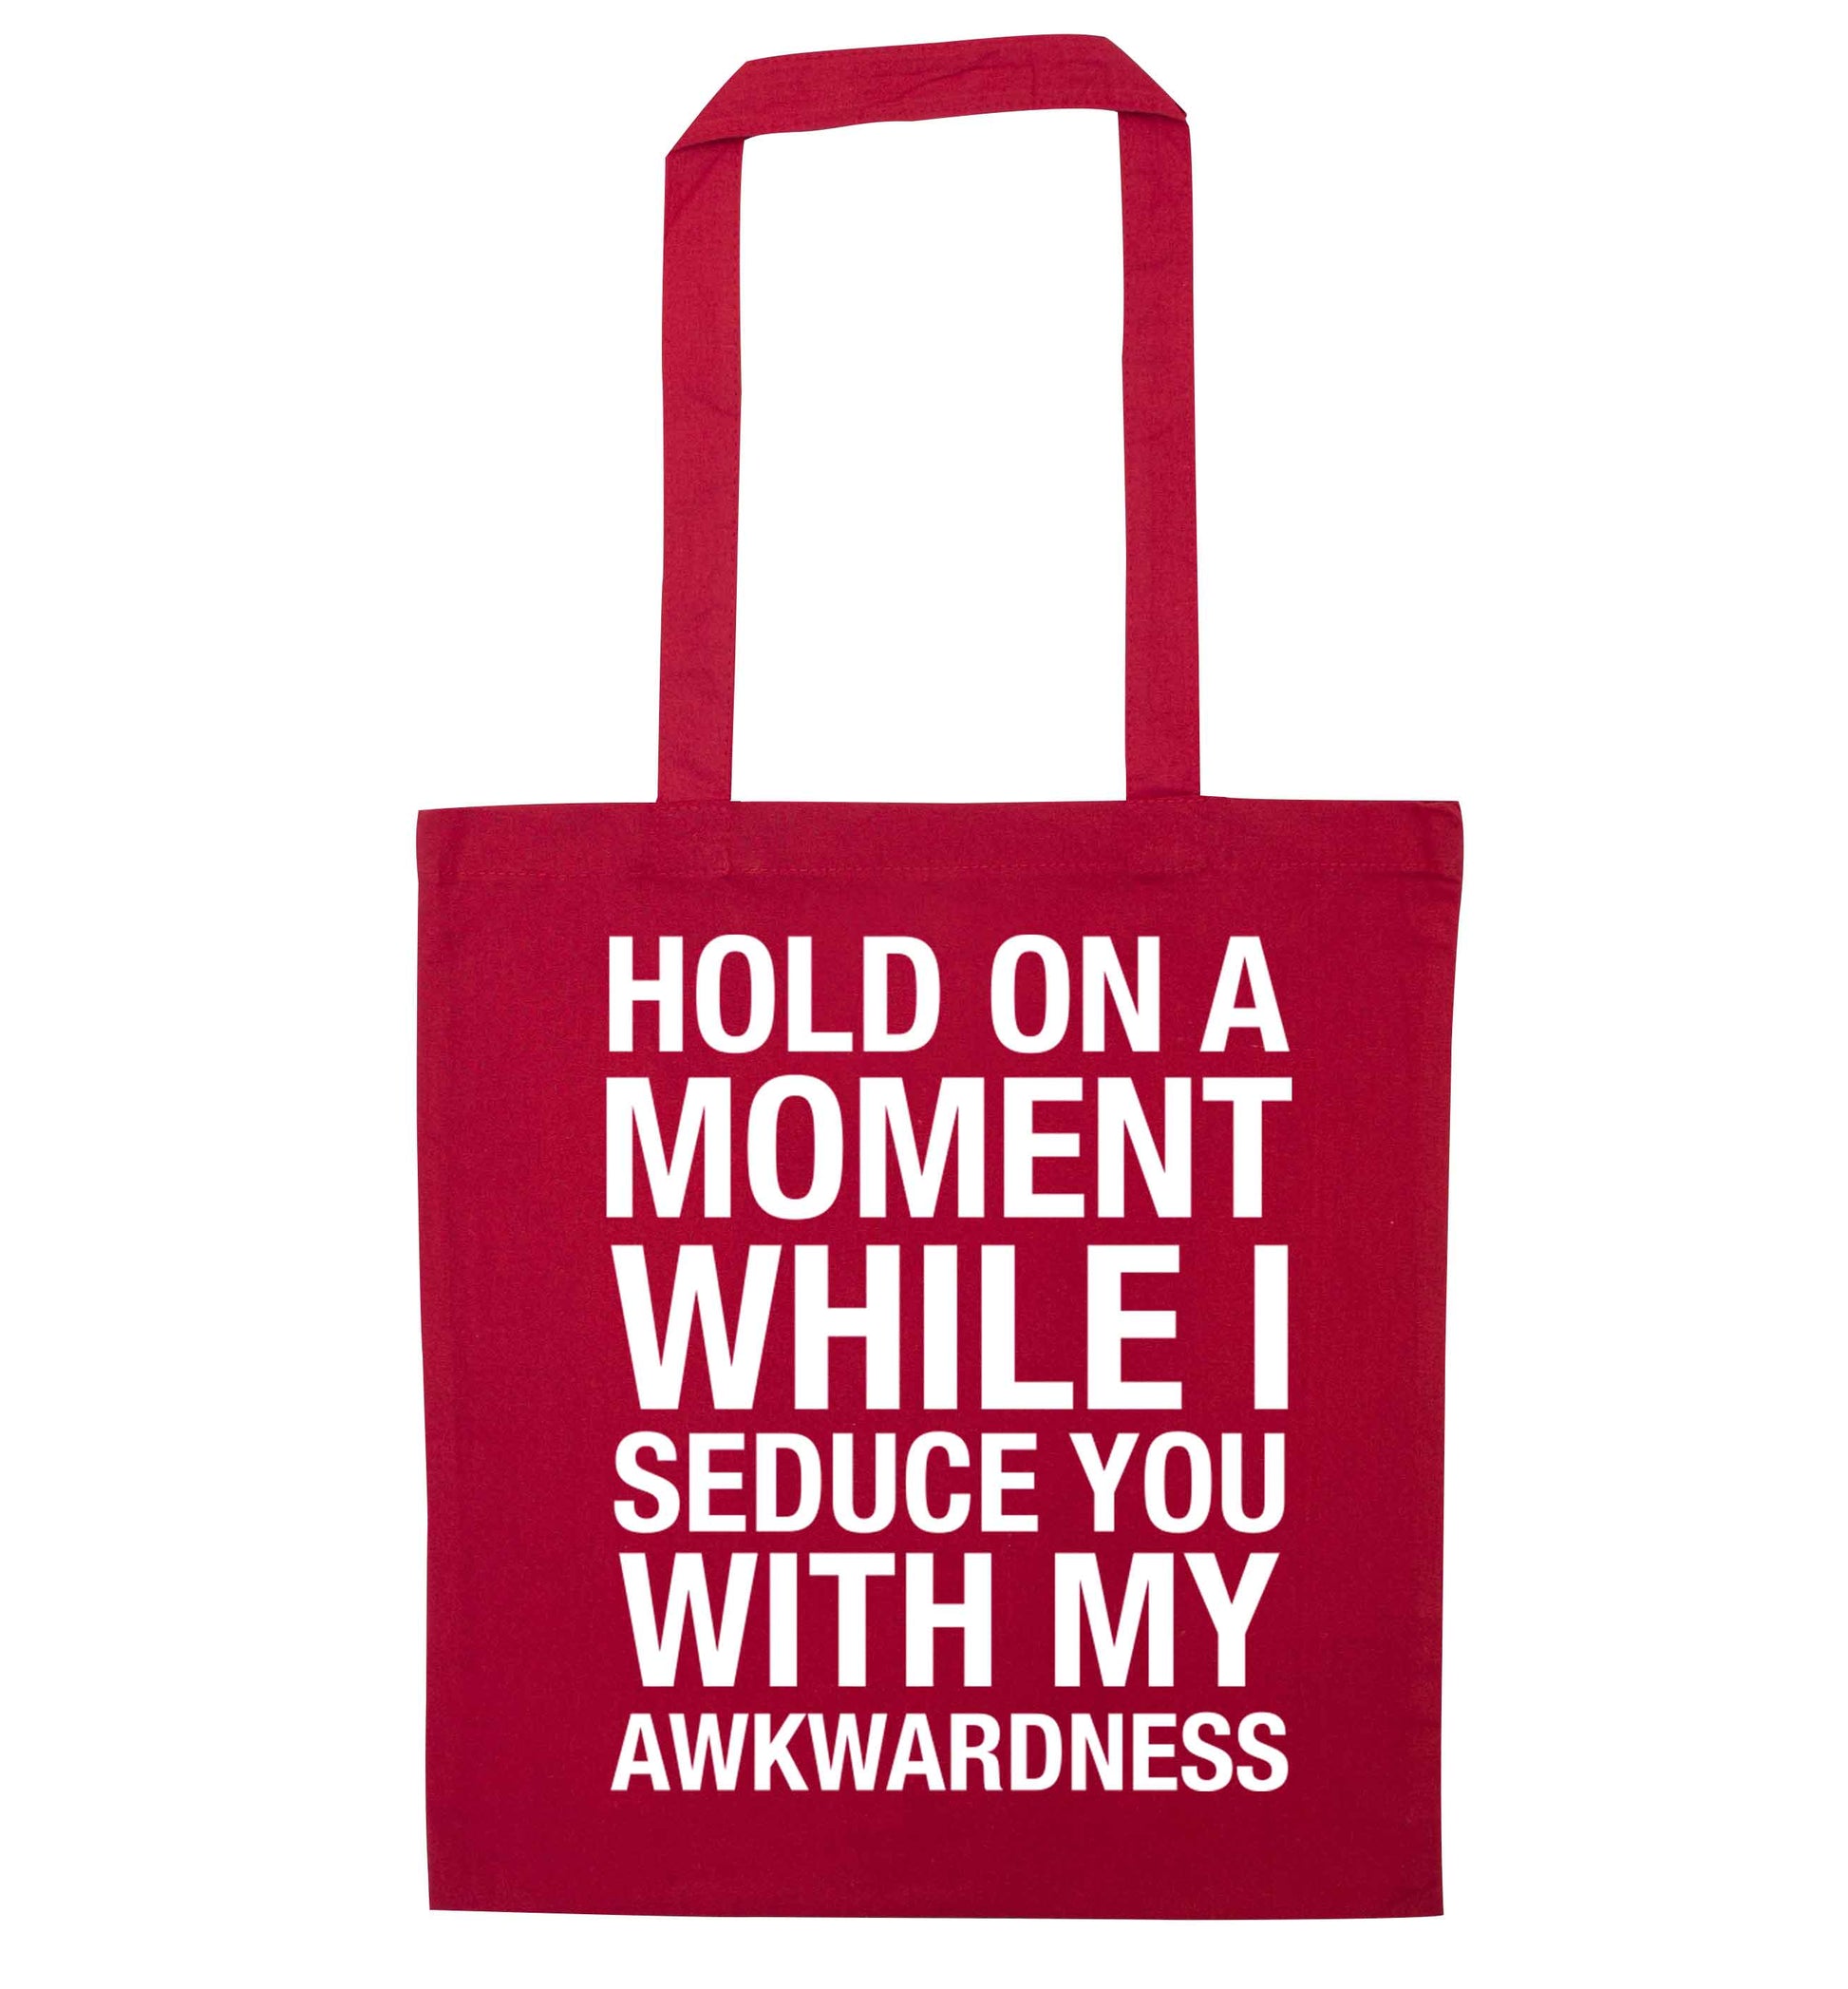 Hold on a moment while I seduce you with my awkwardness red tote bag